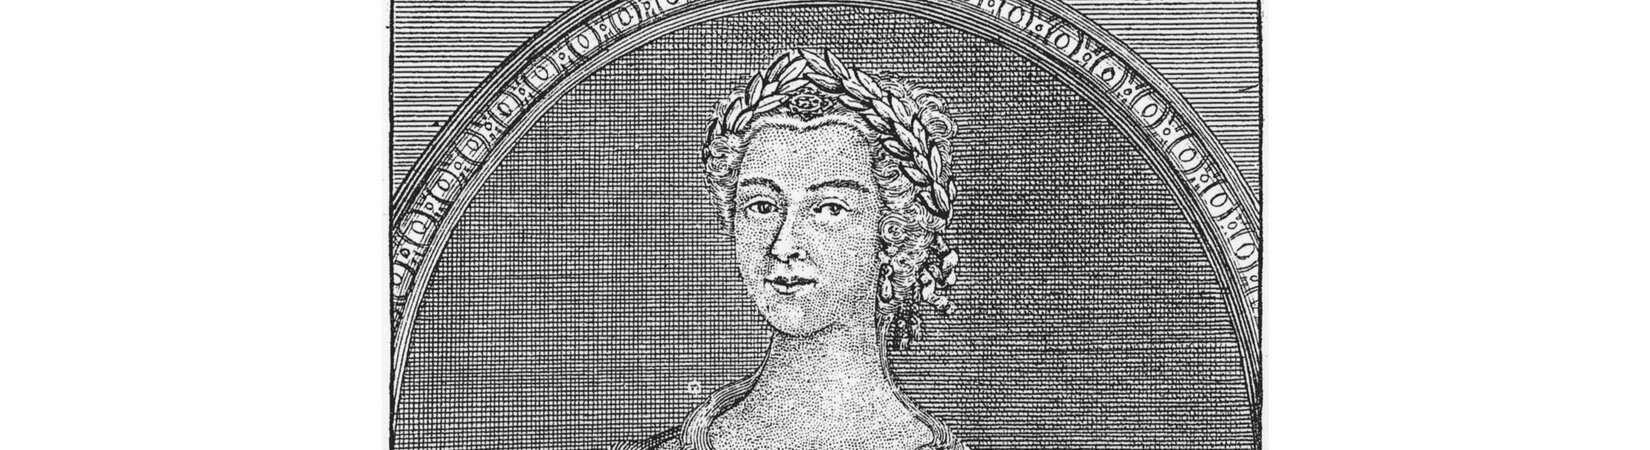 Sidonia Hedwig Zäunemann - crowned poetess of the early Enlightenment